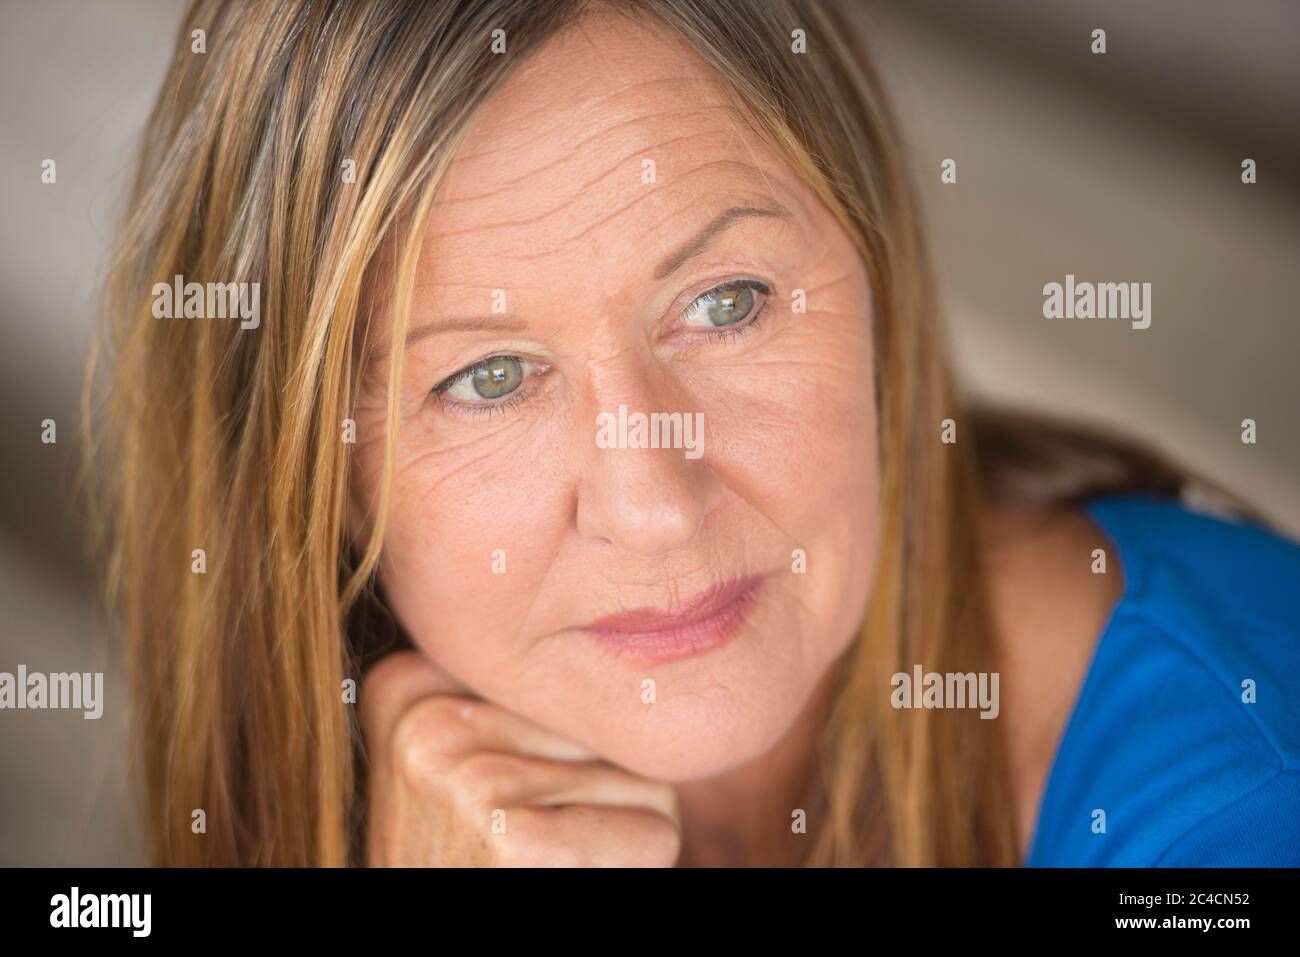 Portrait attractive mature woman with thoughtful serious facial expression, relaxed, confident, blurred background. Stock Photo